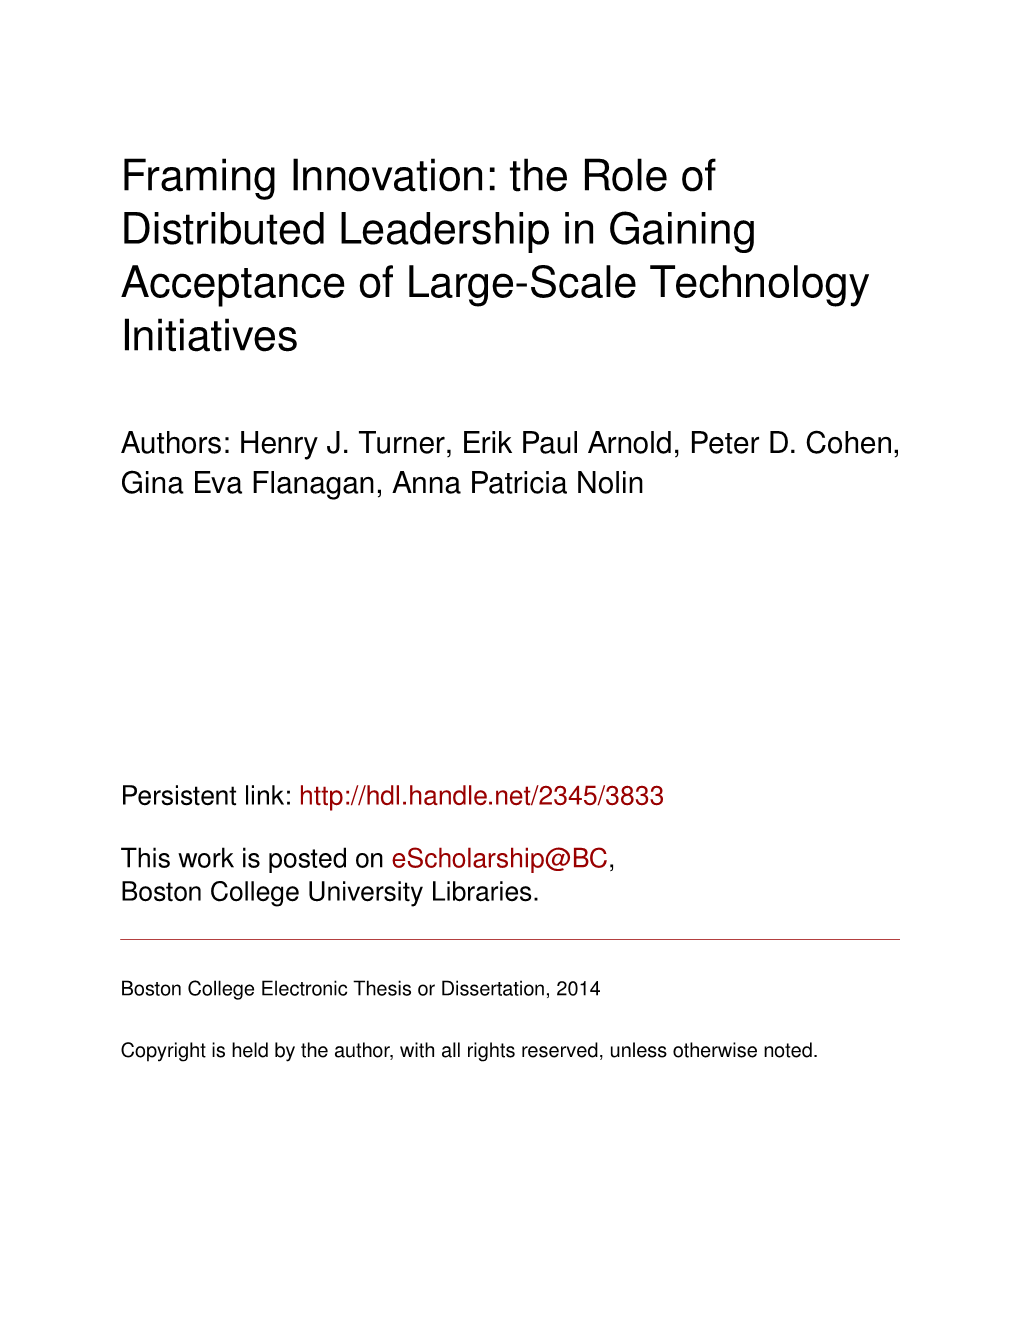 The Role of Distributed Leadership in Gaining Acceptance of Large-Scale Technology Initiatives